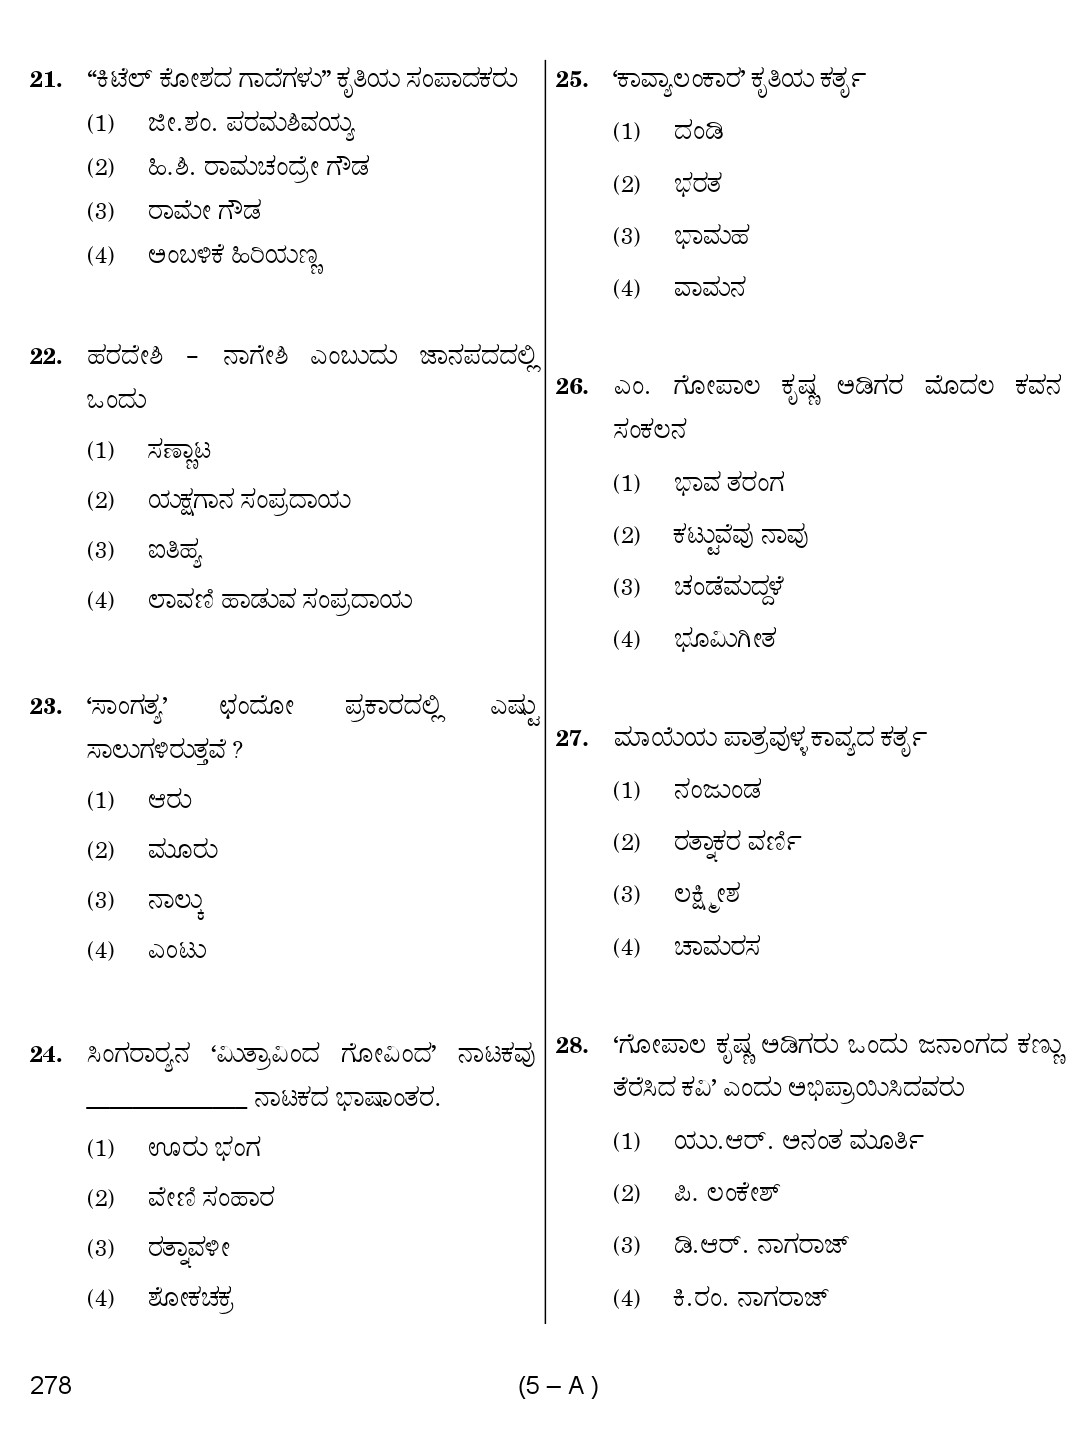 Karnataka PSC First Division Computer Assistants Exam Sample Question Paper 278 5